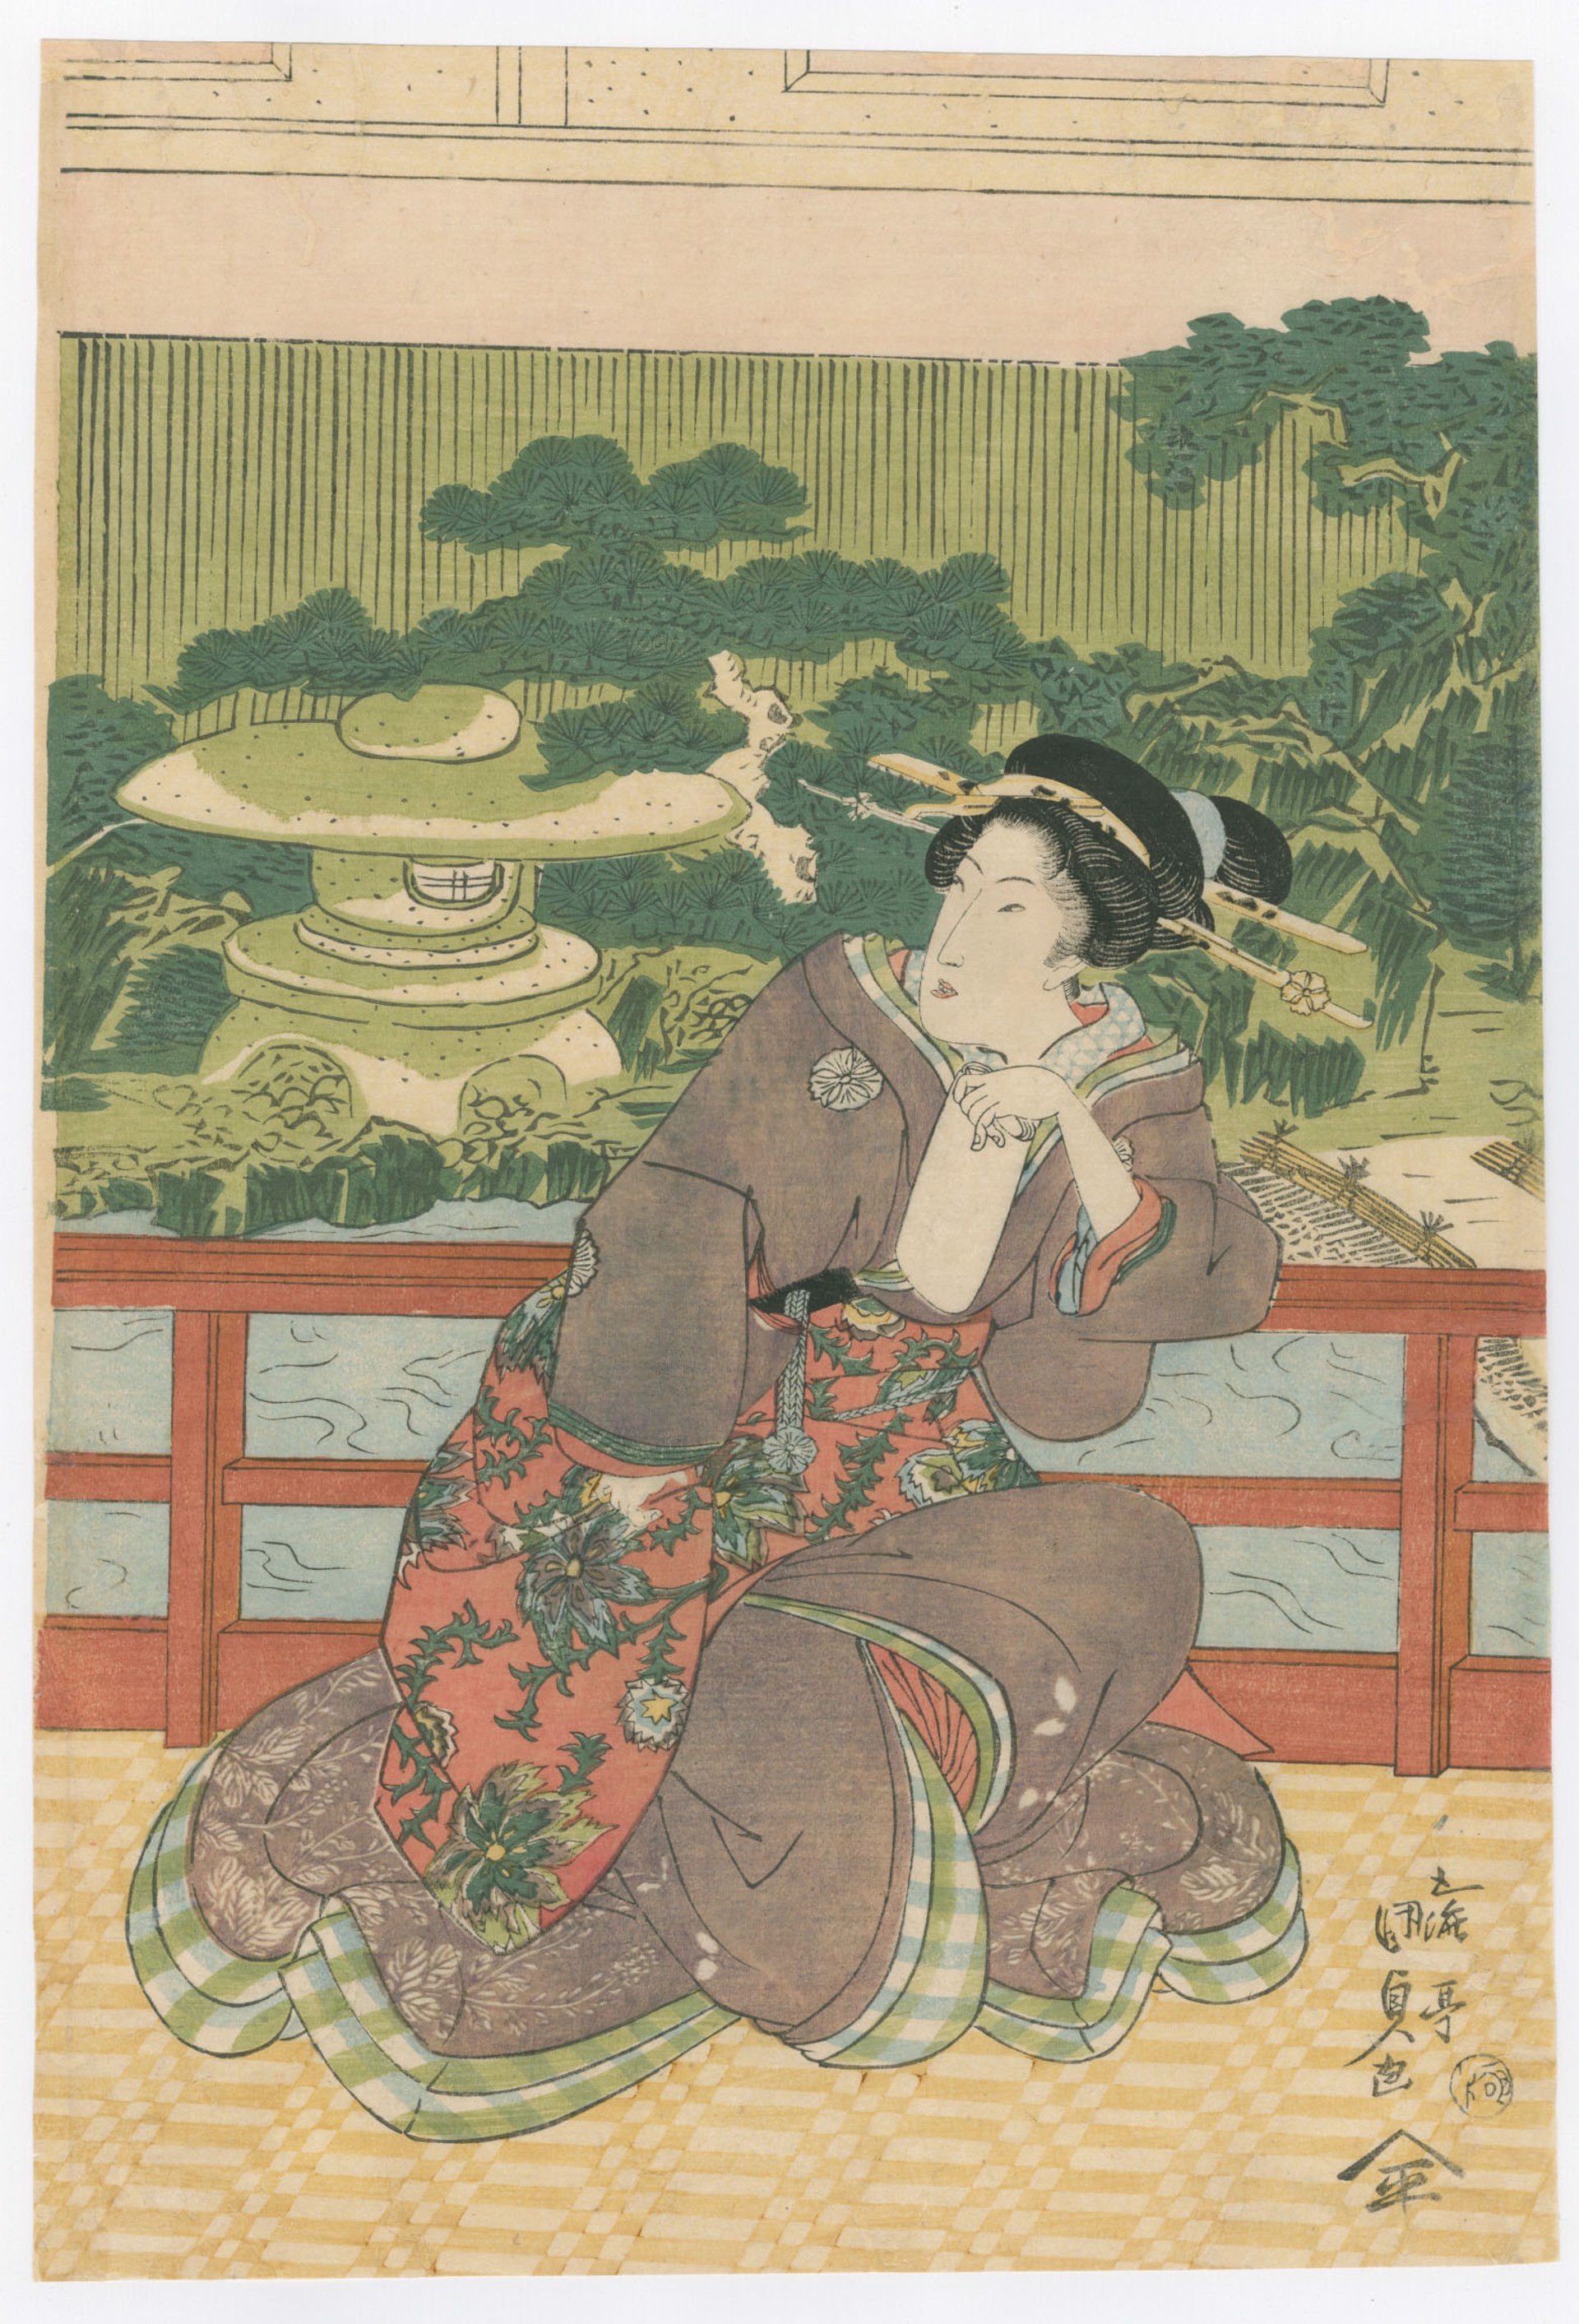 The Roof Garden of the Oi Clan Mansion on Yoshi Street in Edo by Kunisada